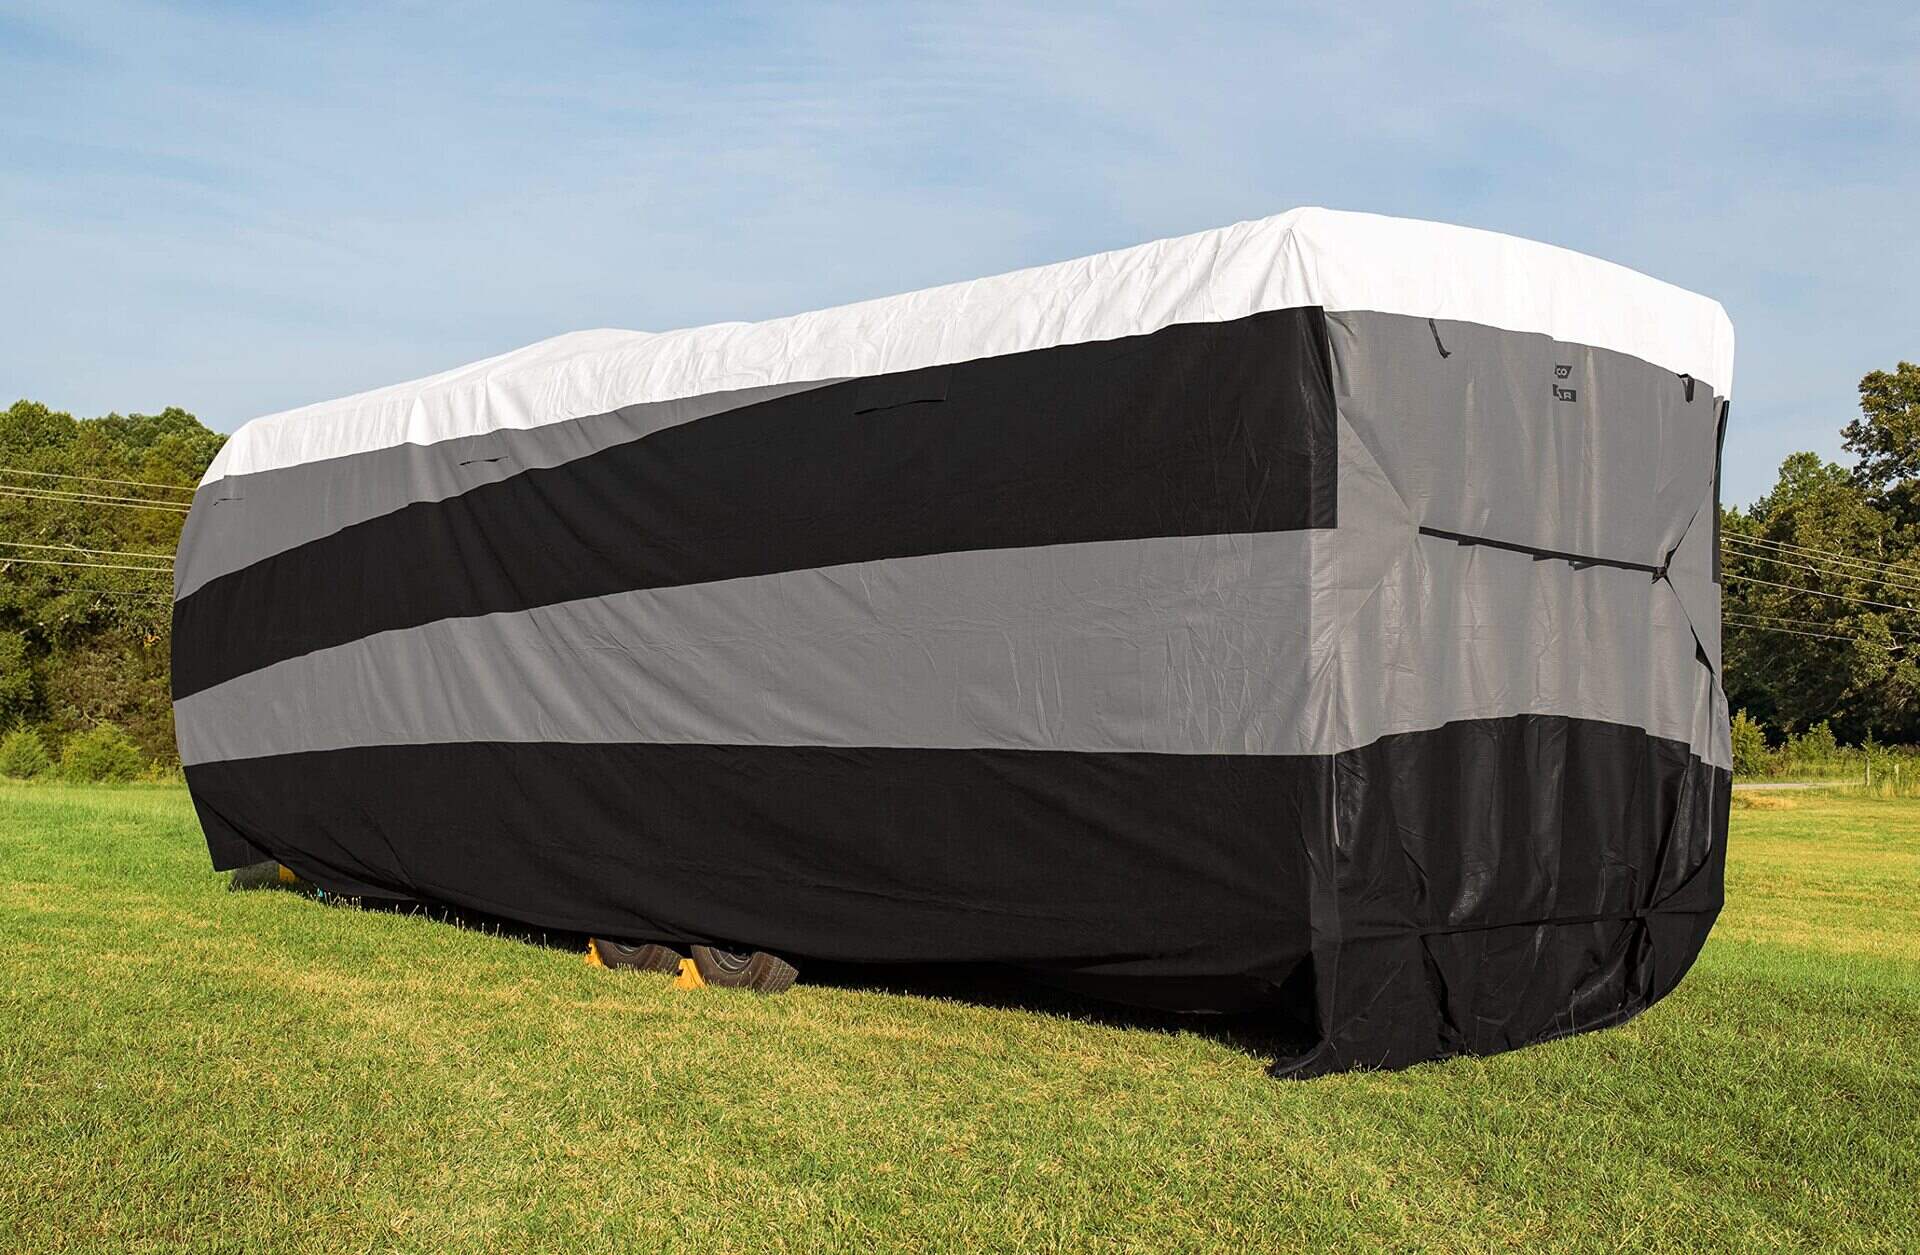 GEARFLAG Travel Trailer RV Cover 4 Layers top with reinforced windproo